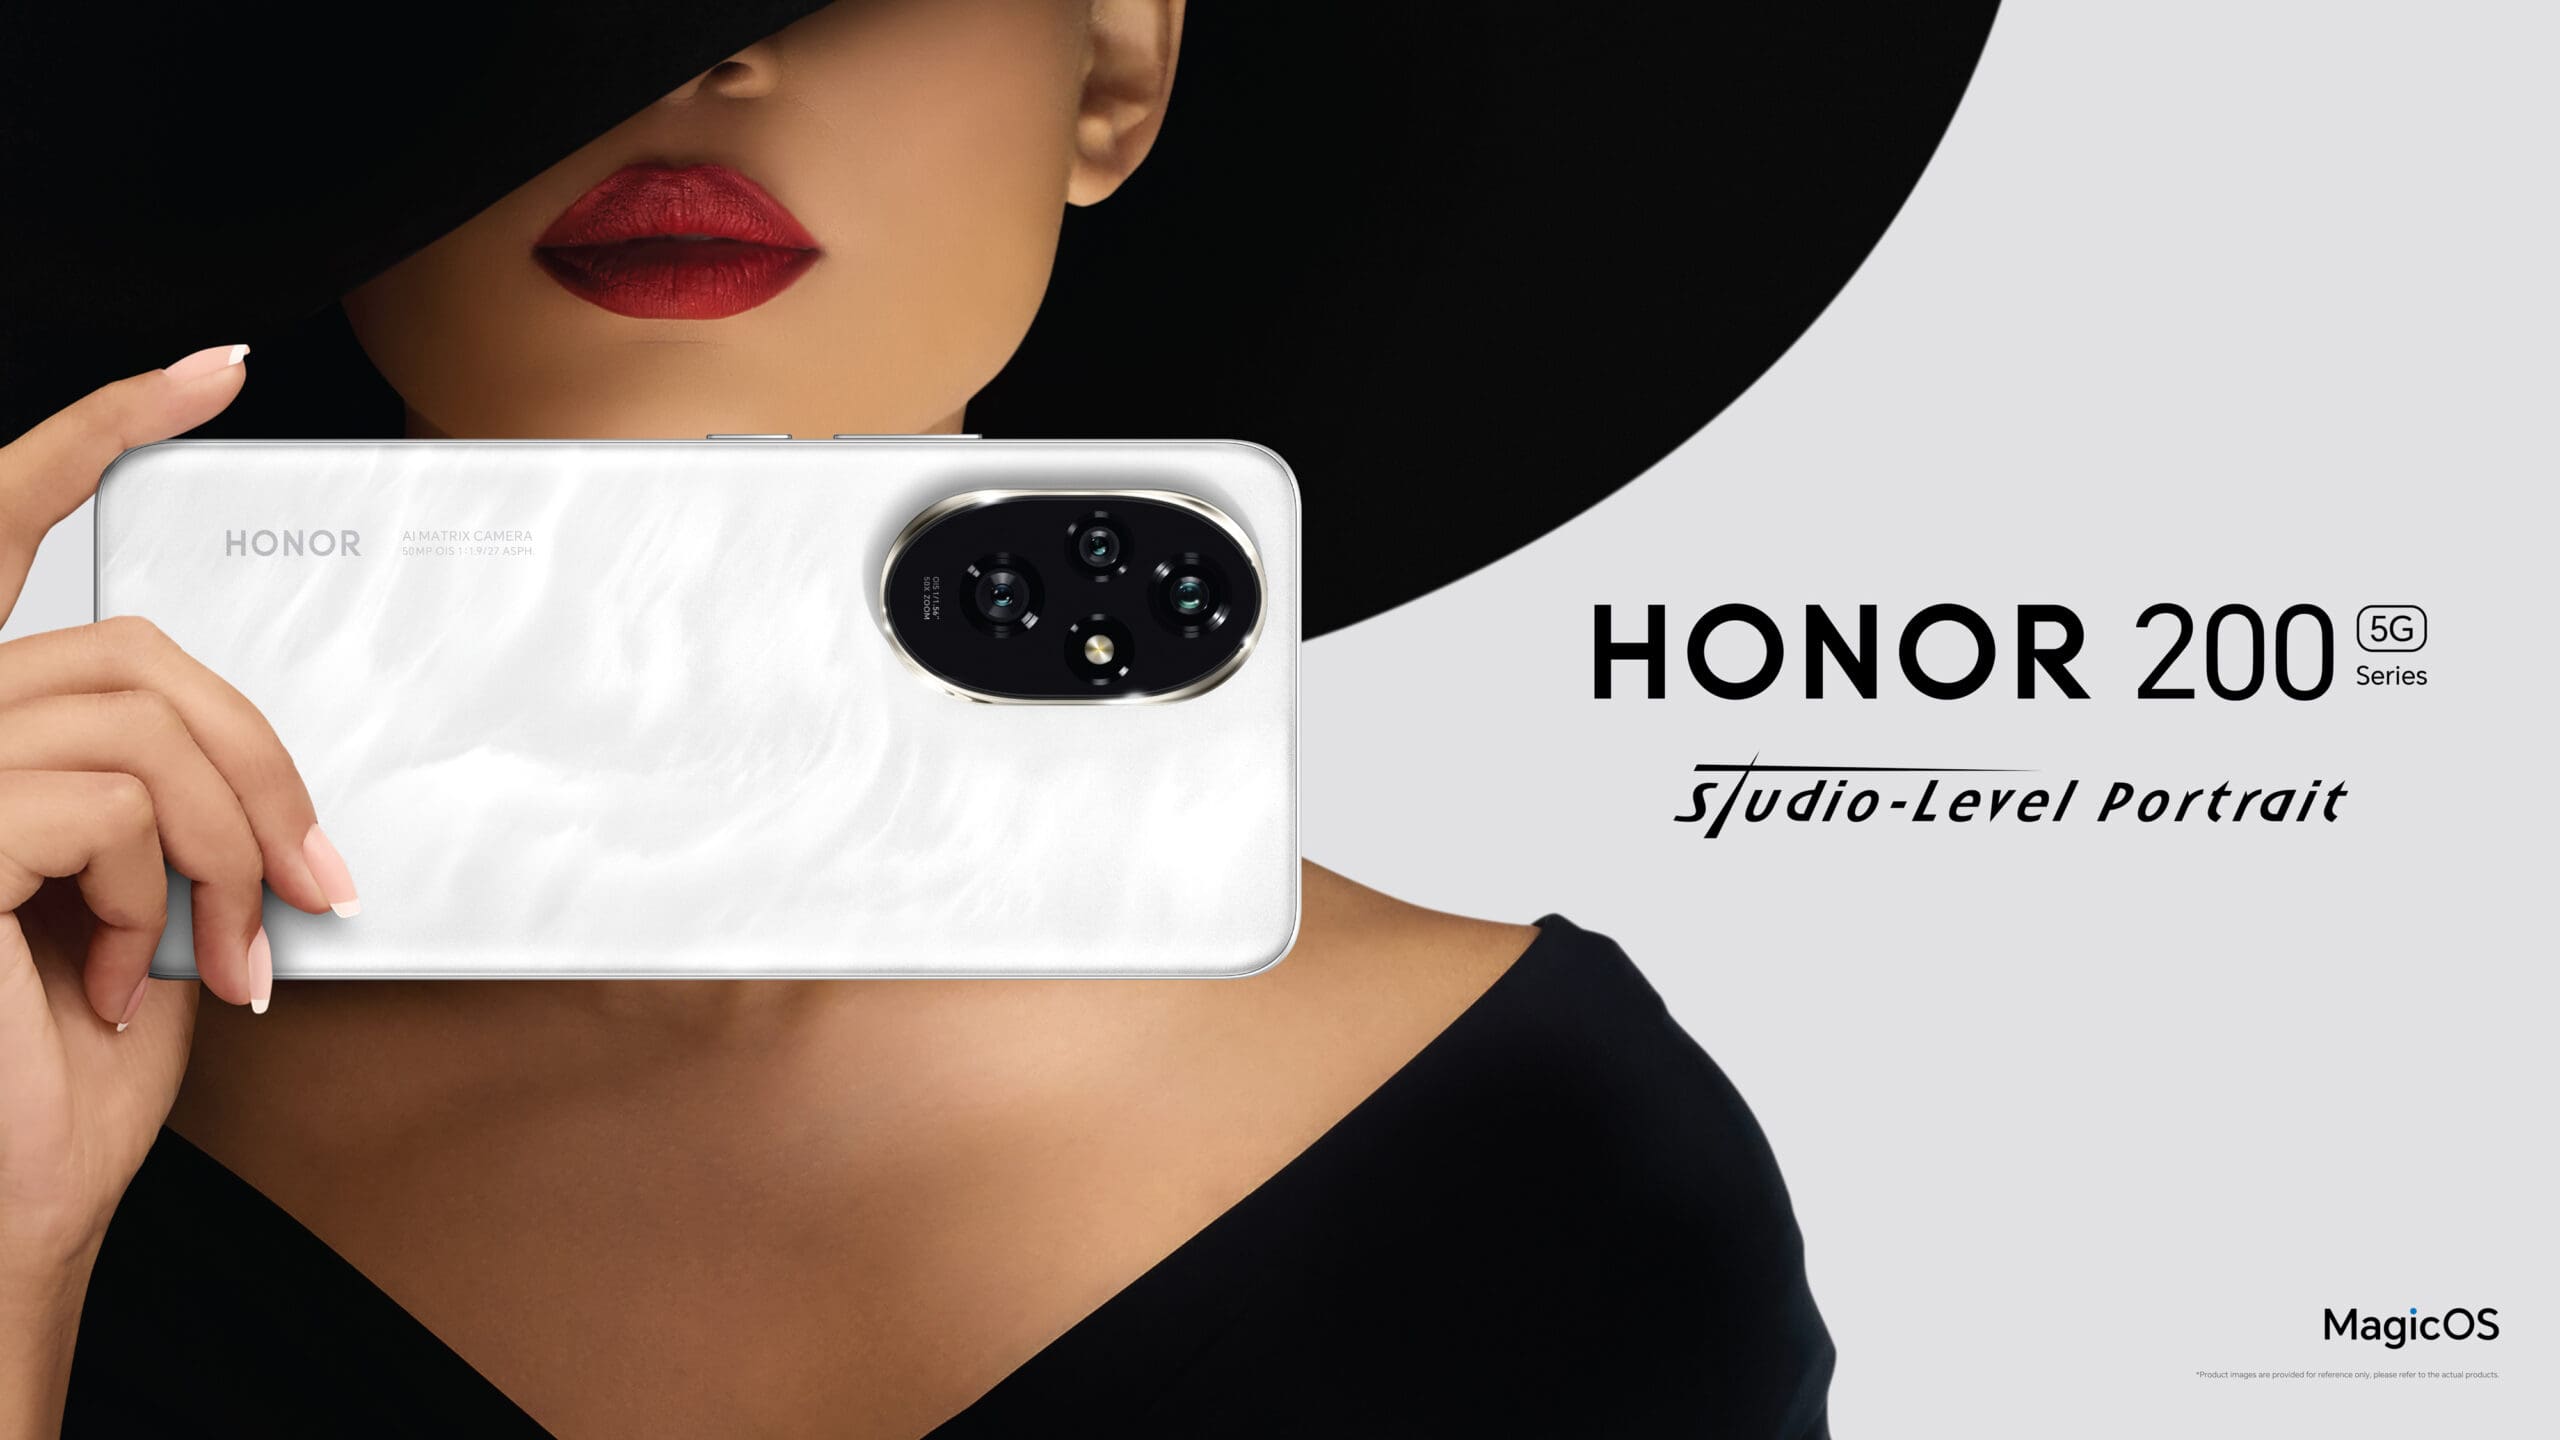 HONOR Launches HONOR 200 Series With Studio-Level Photography Capabilities